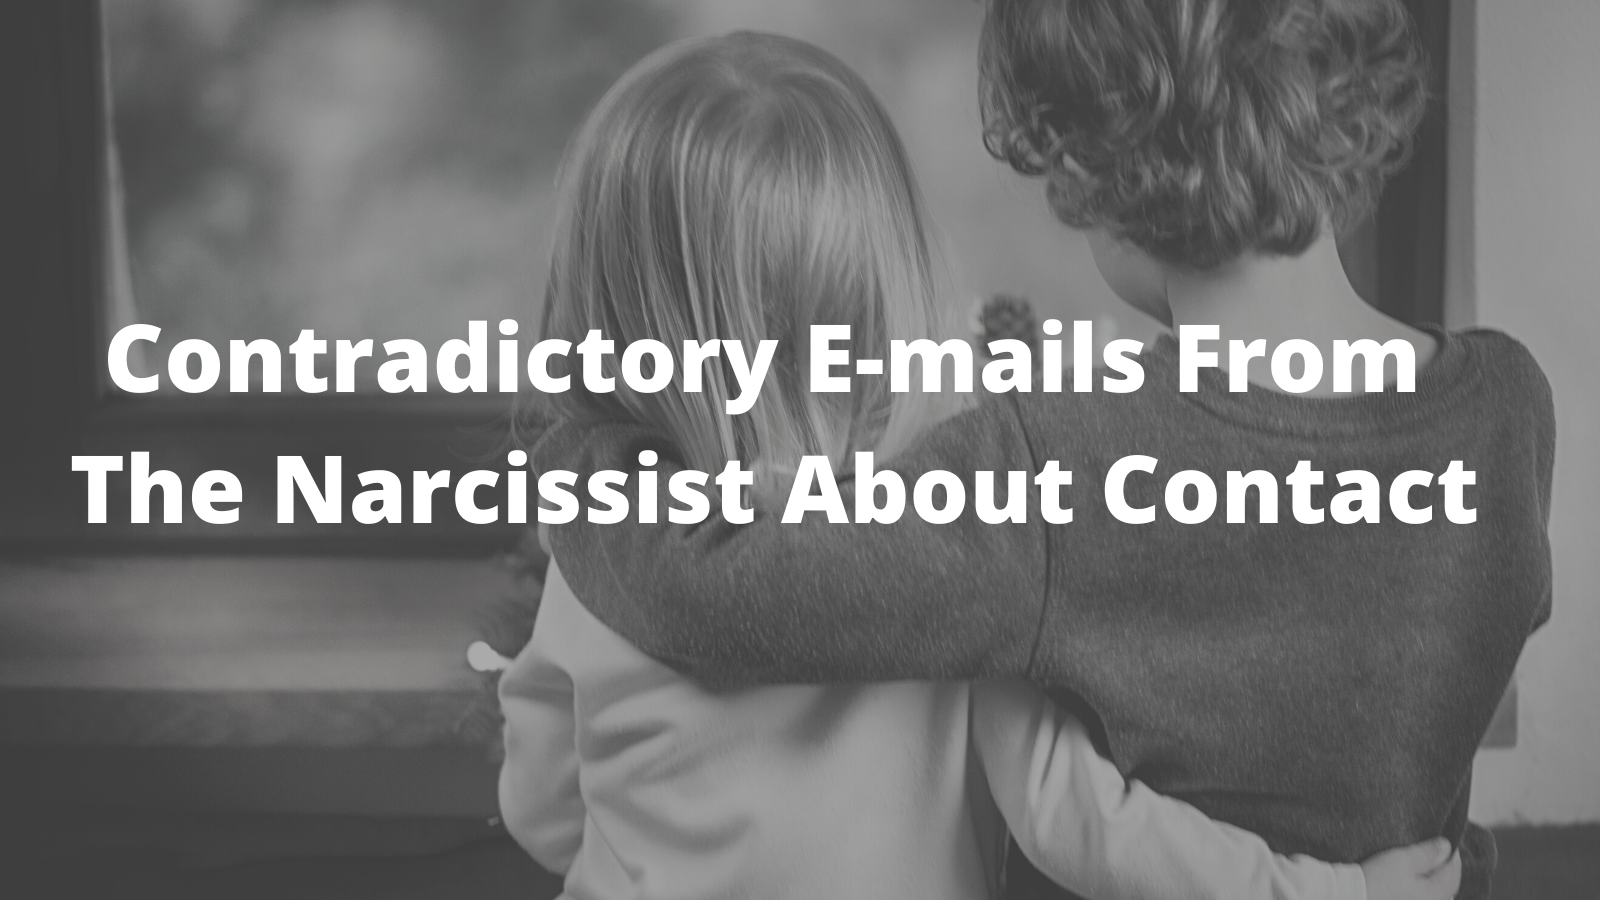 E-mails From The Narcissist About Contact